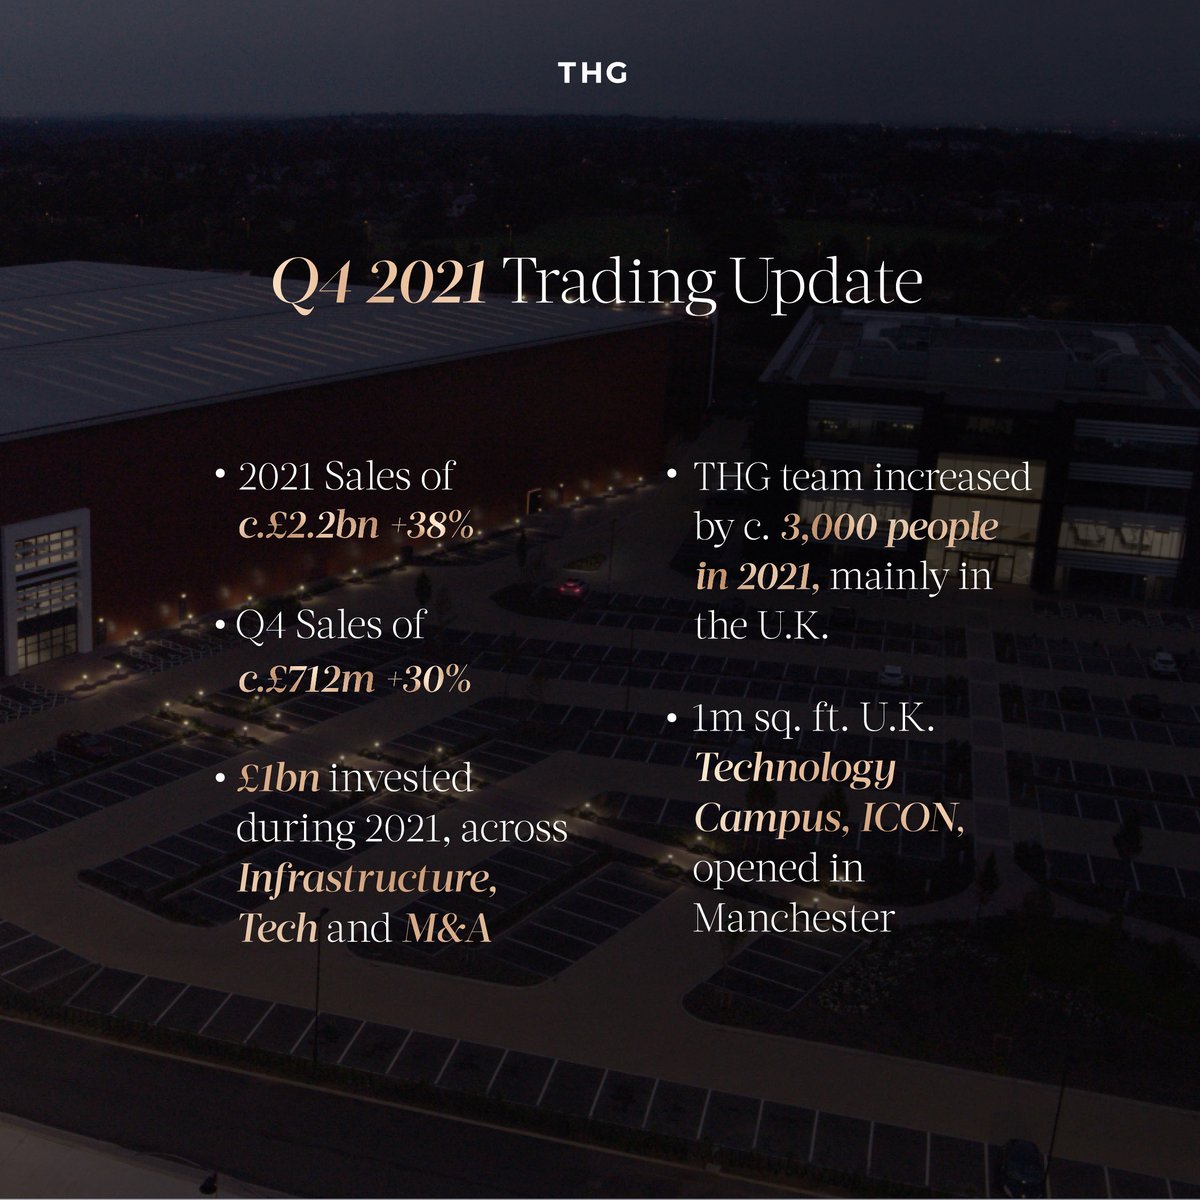 We are thrilled to announce significant revenue growth across all divisions in our Q4 update today. Revenue for the quarter grew 29.7% YoY and revenue guidance for FY22 is maintained at +22% to +25%. A great start to 2022, we are excited to see what this year brings. #weareTHG